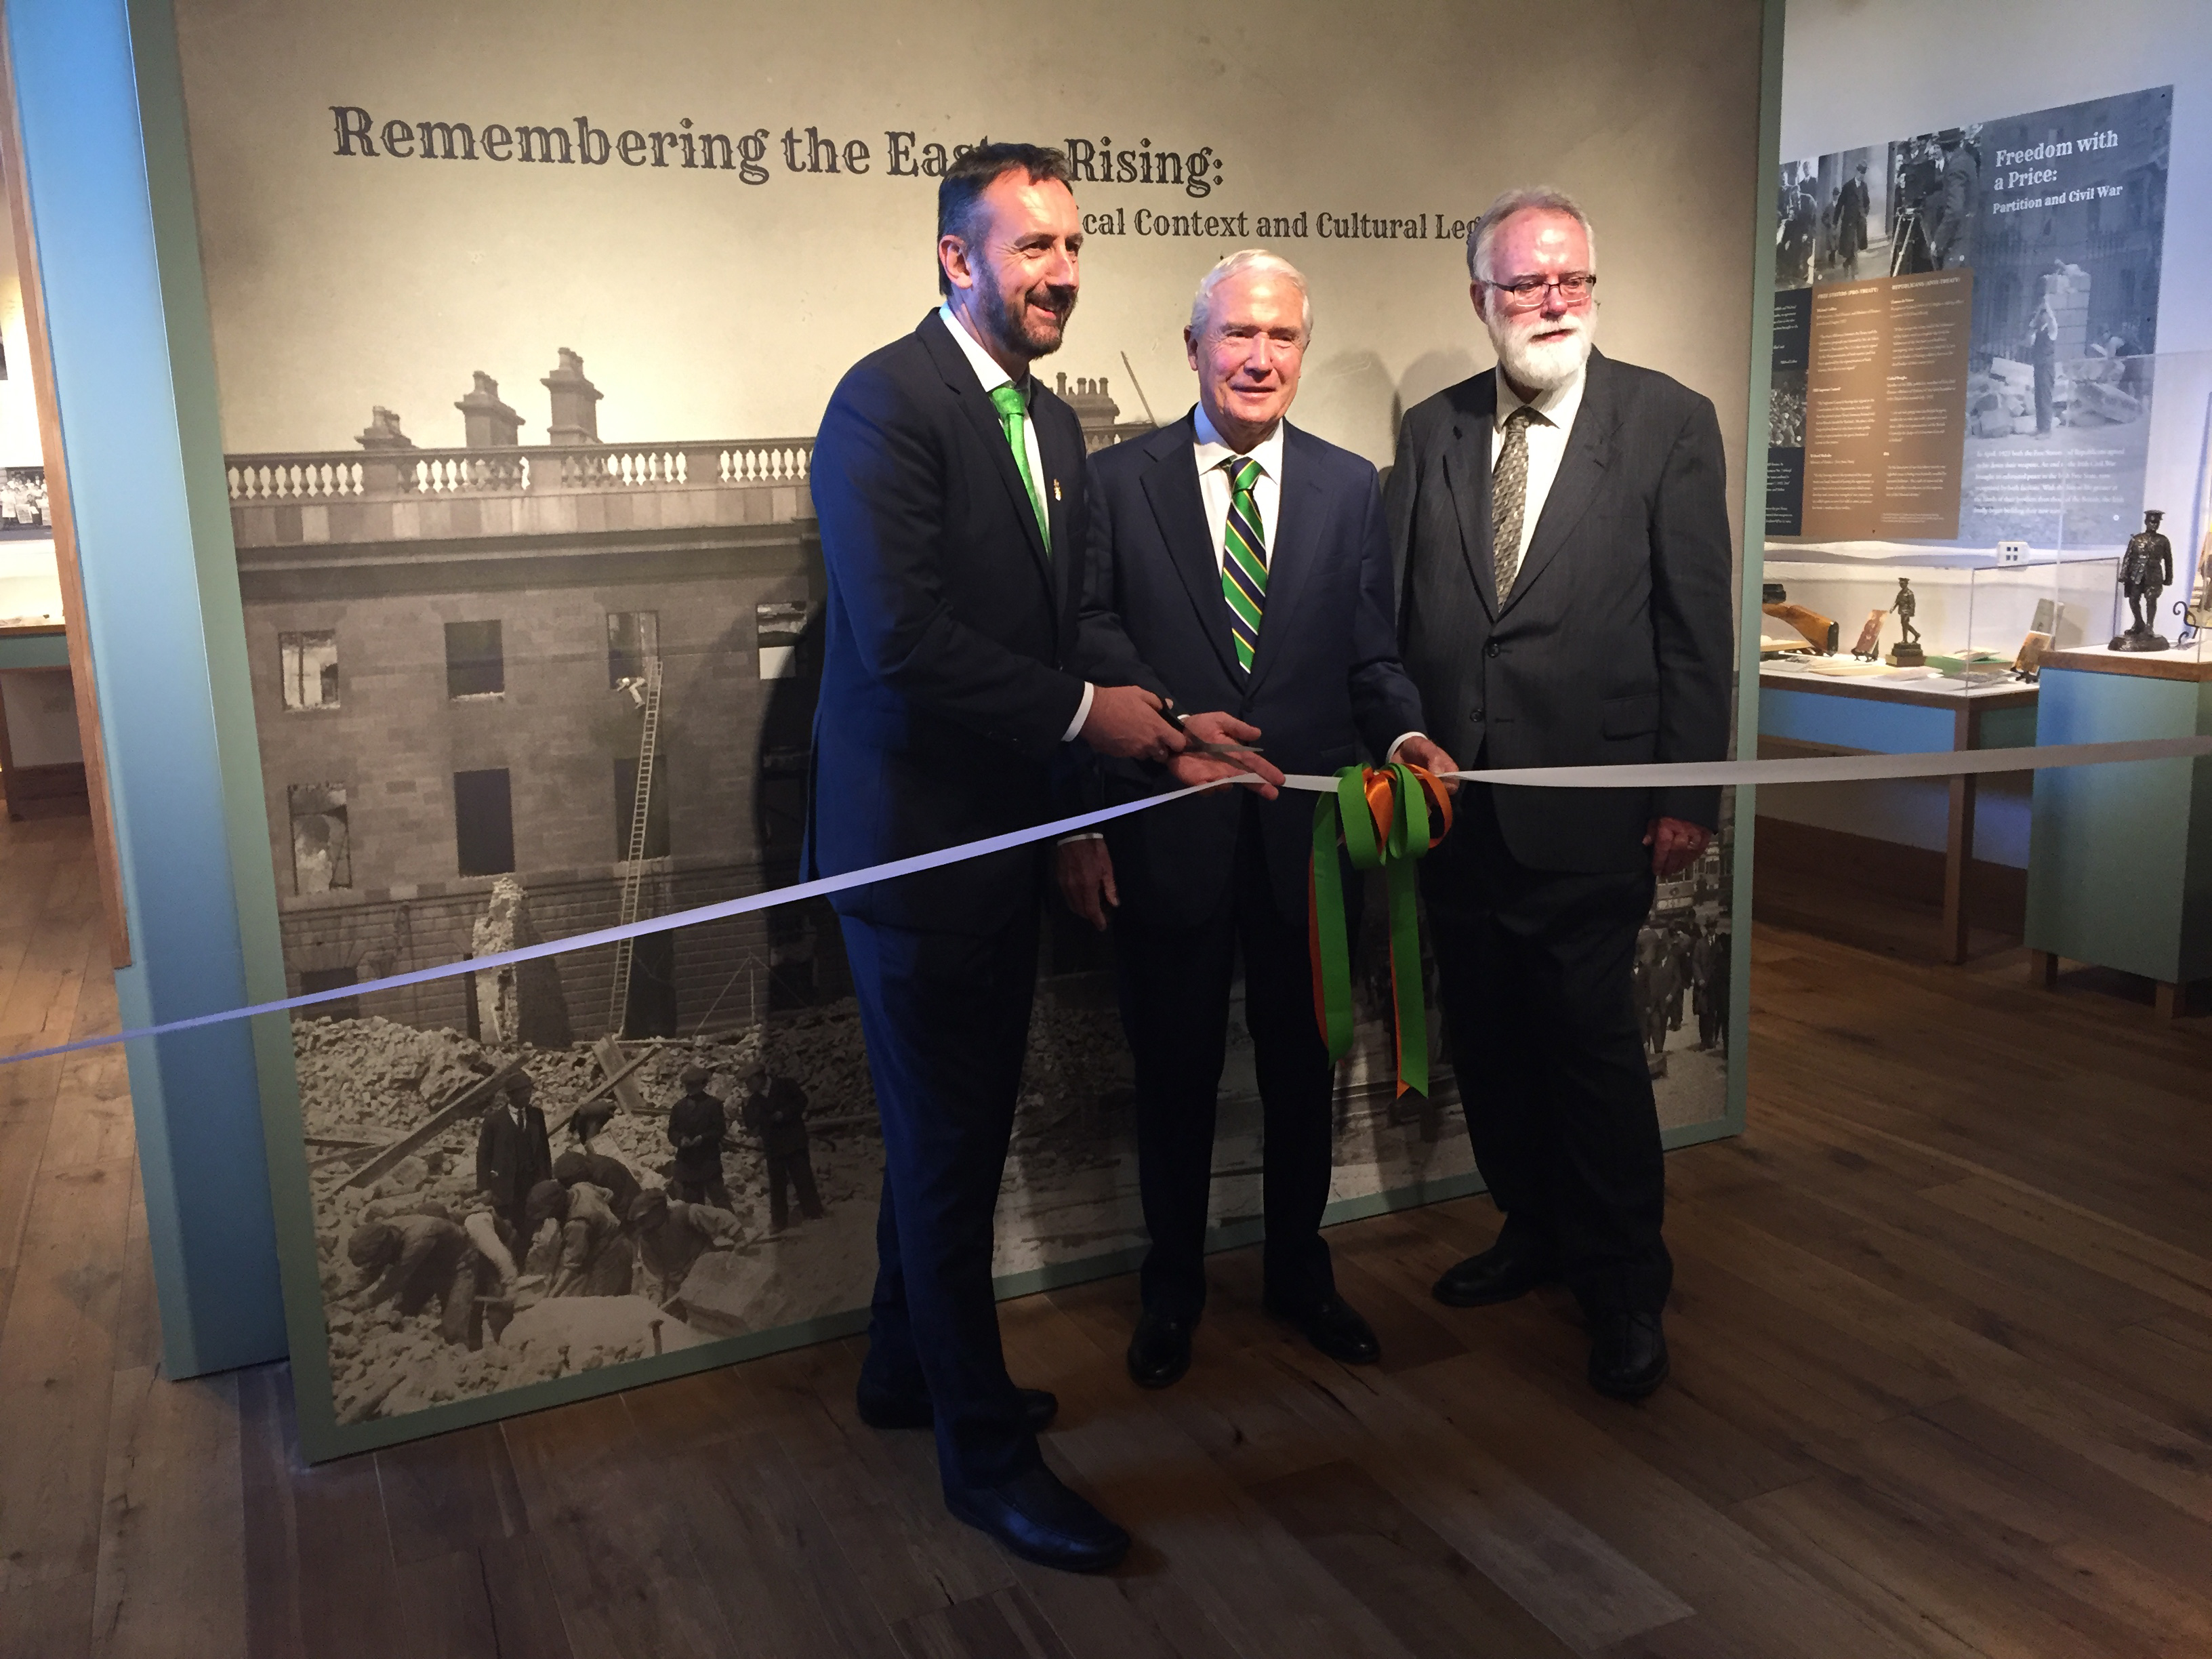 Consul General Philip Grant, ICLF Treasurer Norman McClelland, and ICLF President Paul Ahern at the 1916 Commemoration Exhibit Grand Opening in October of 2015. (Photo: Caroline Woodiel)